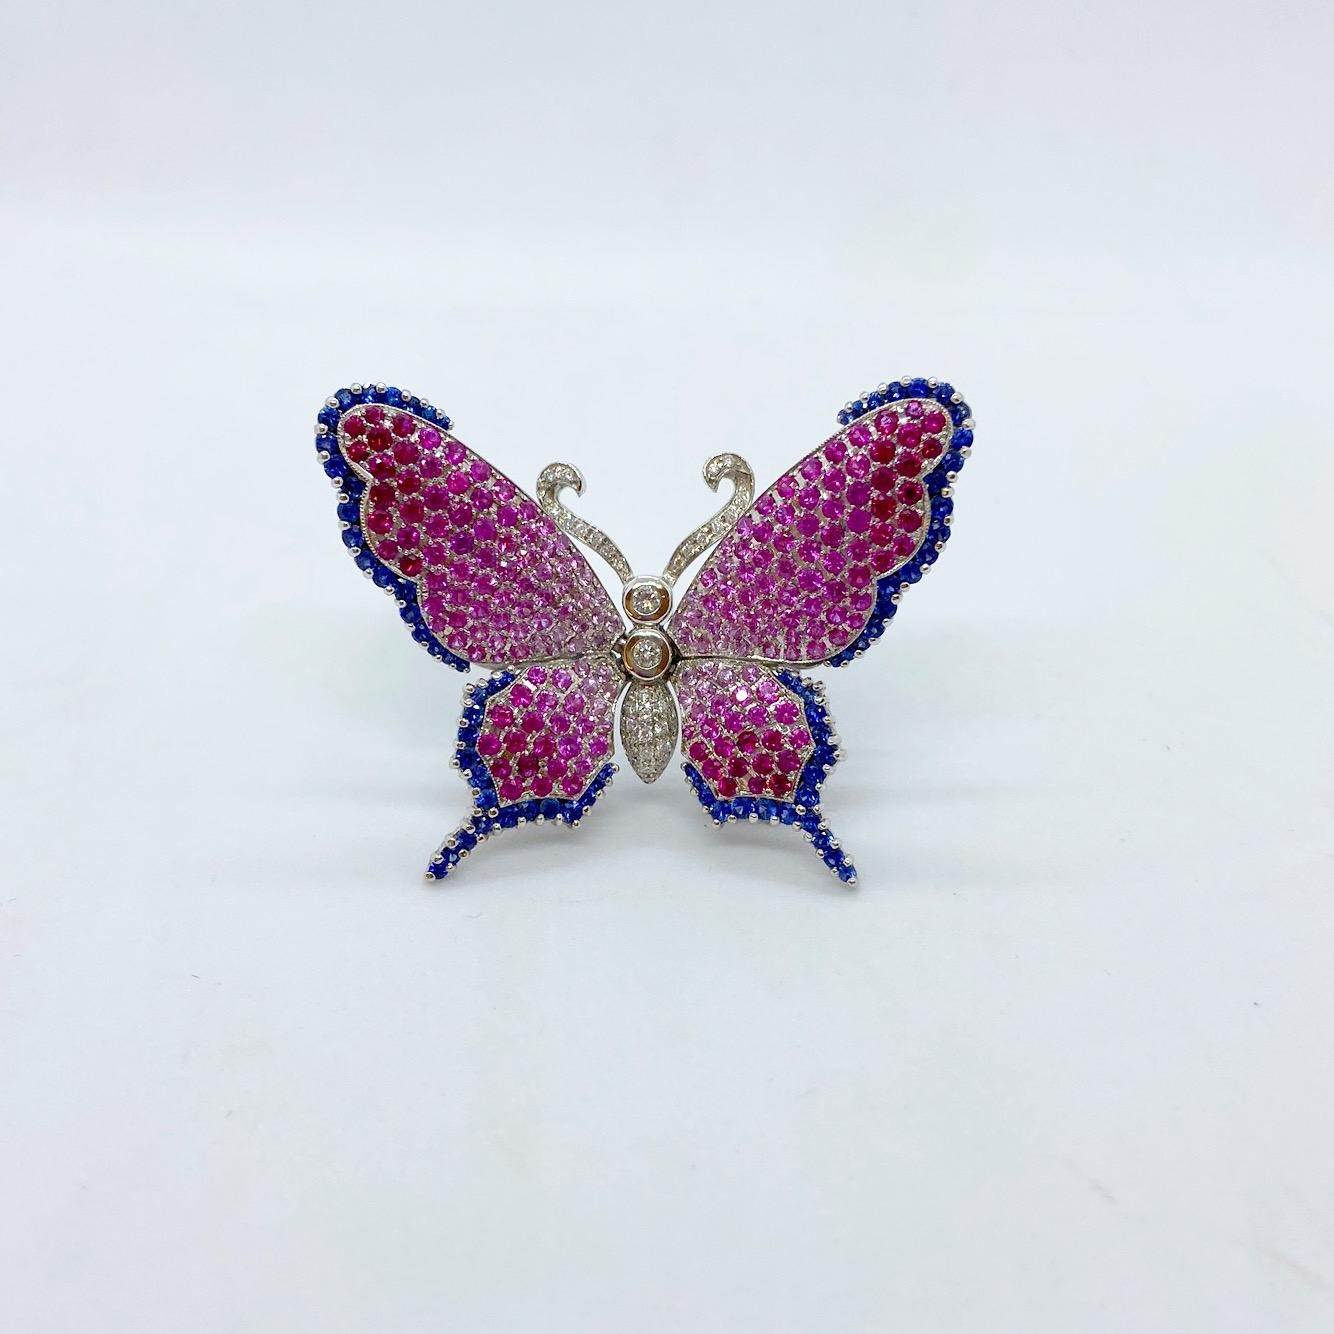 Made exclusively for Cellini NYC ....This lovely 18 karat white gold brooch is set with round brilliant Pink Sapphires. The four wings are trimmed with round brilliant cut Blue Sapphires. The center body and antennae are set with round brilliant